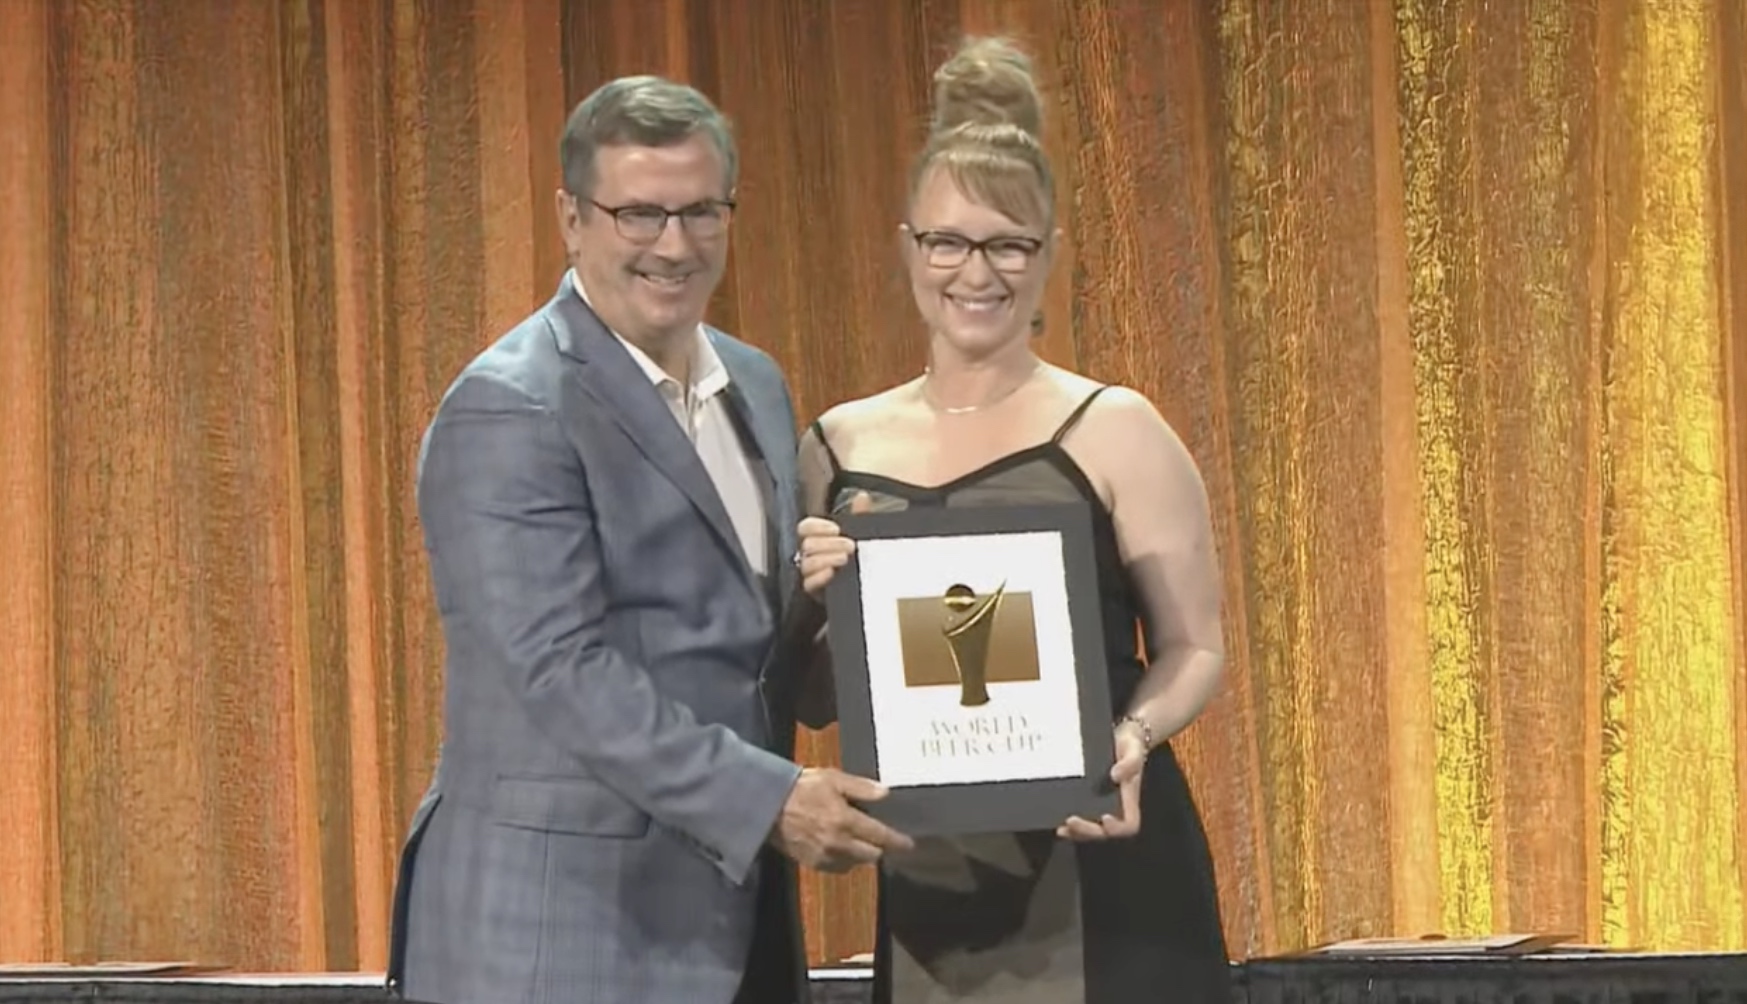 Tonya Cornett receiving an award at the 2023 World Beer Cup. (image courtesy of The Brewing Network)